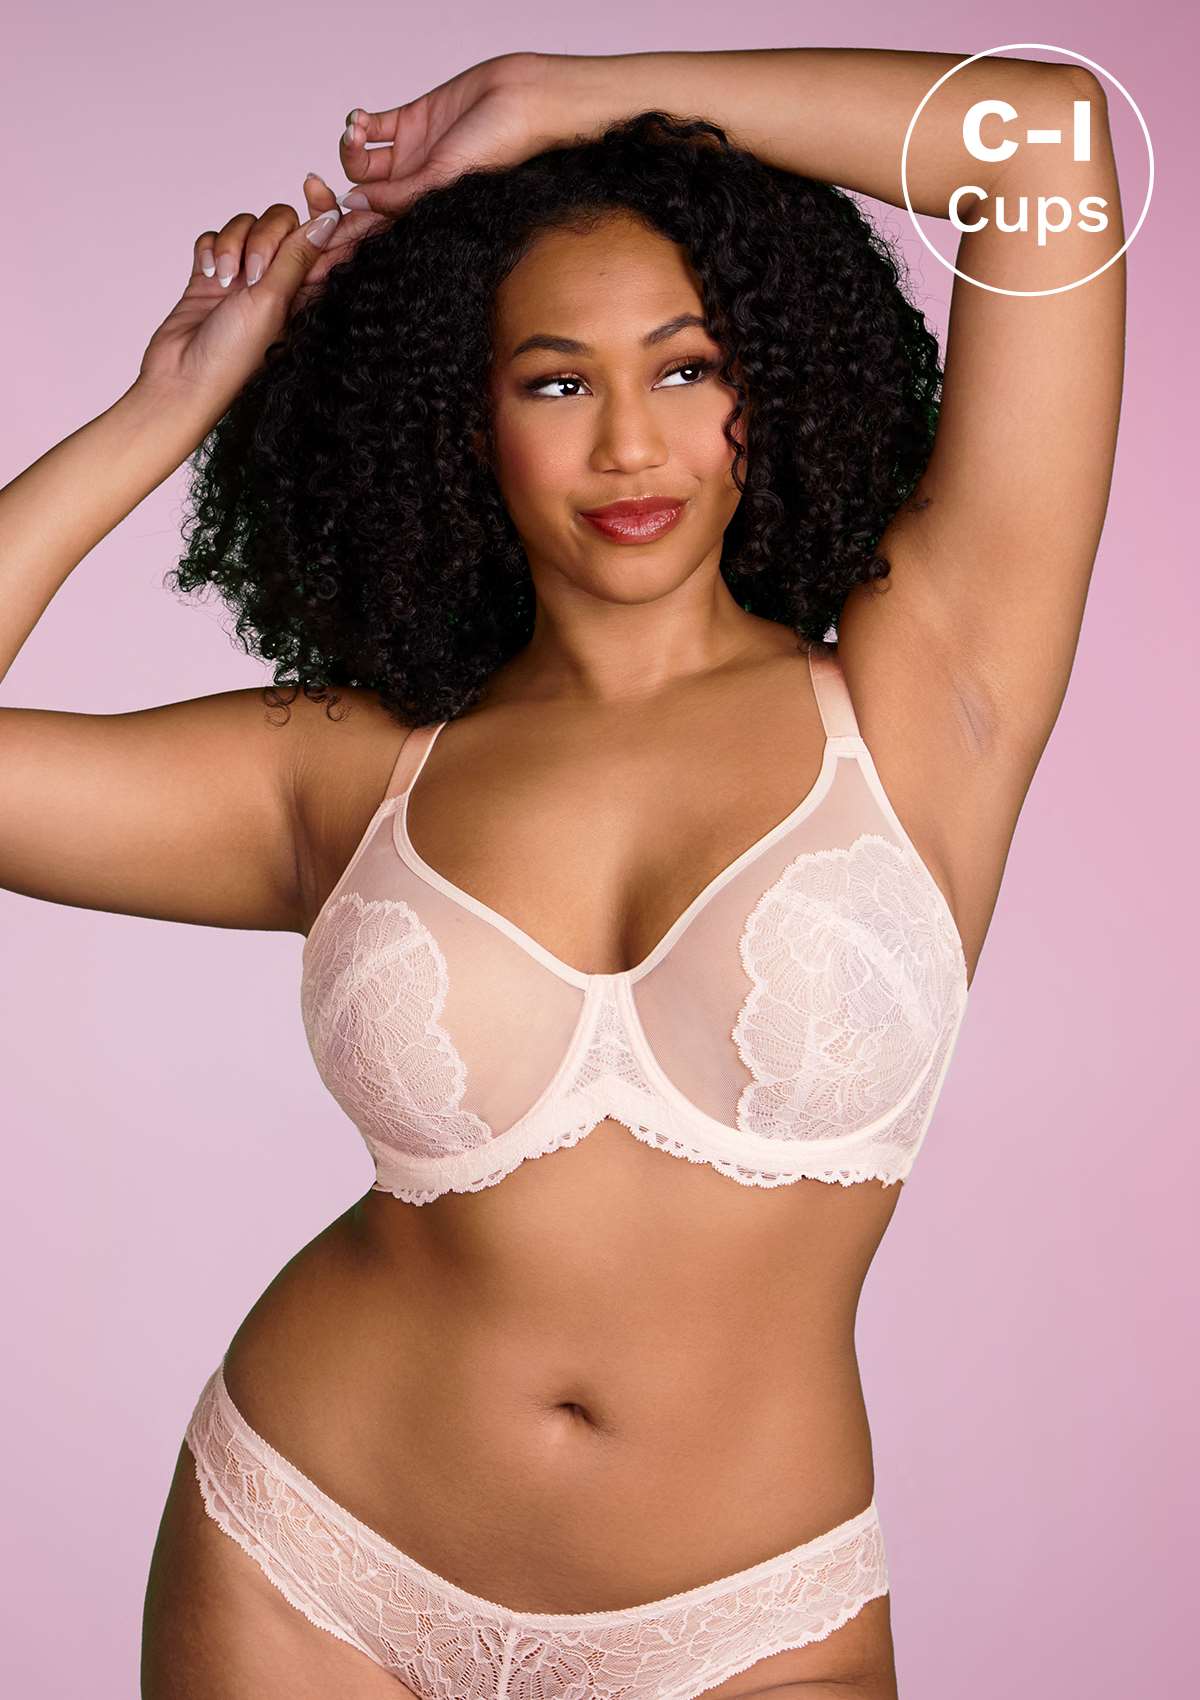 HSIA Blossom Sheer Lace Bra: Comfortable Underwire Bra For Big Busts - White / 36 / C